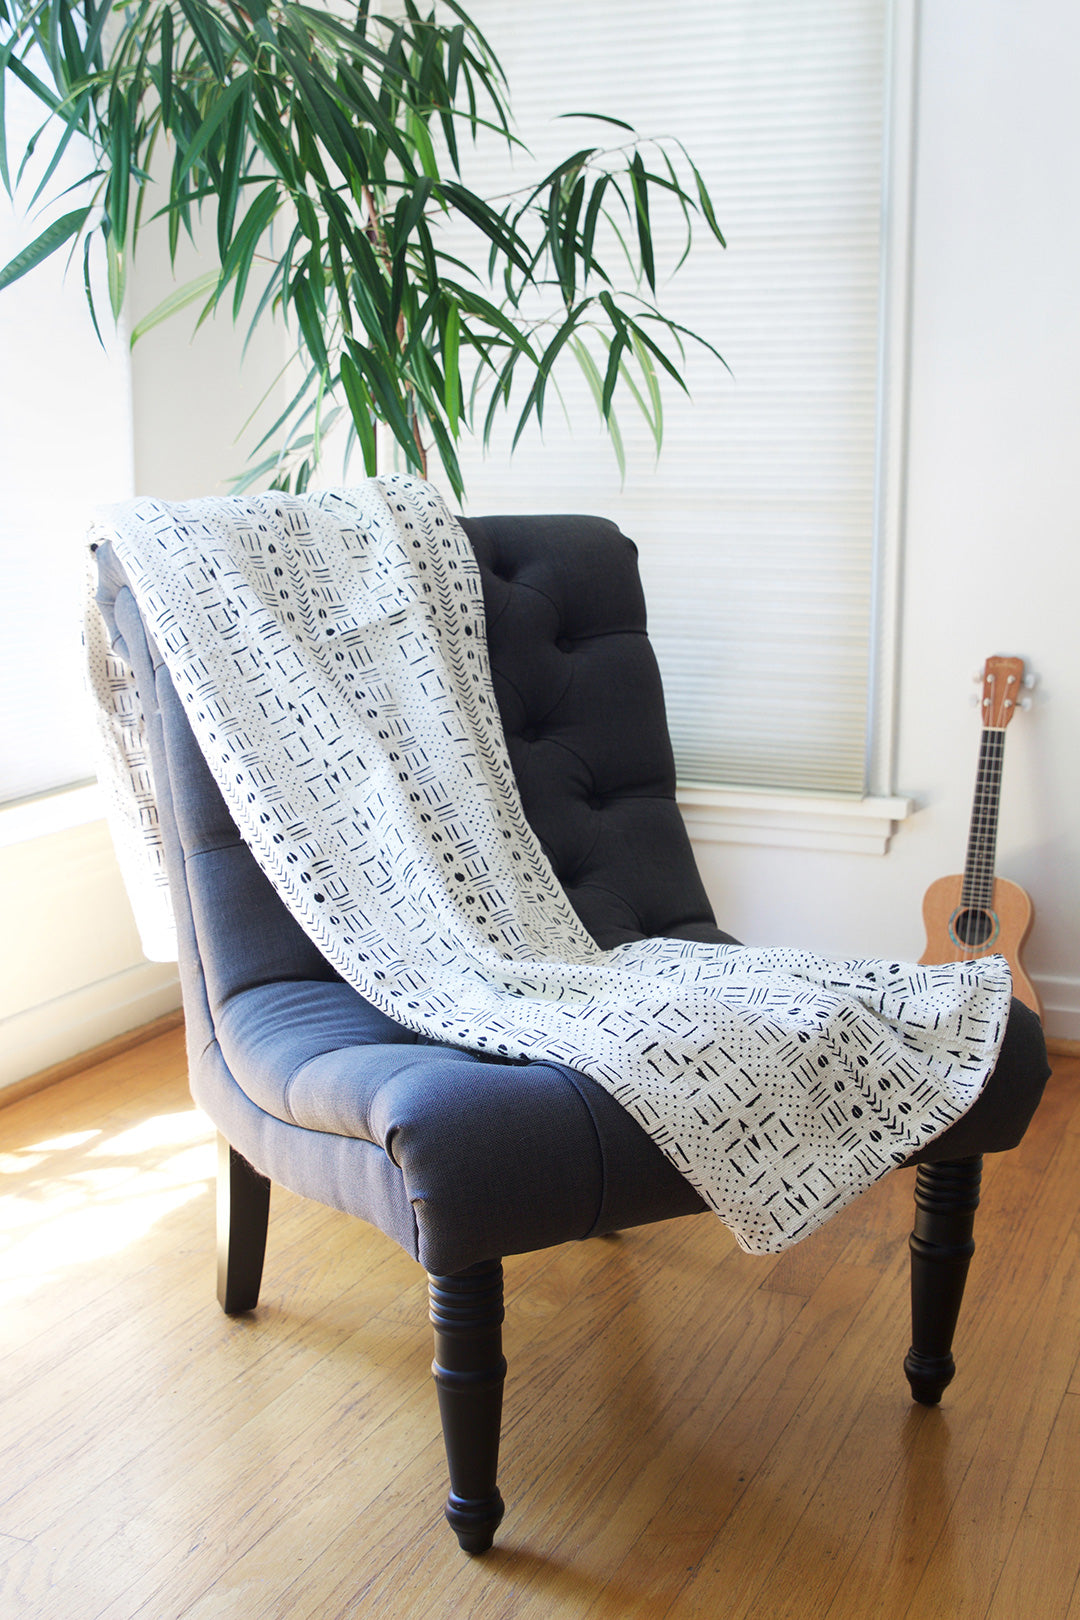 White Handmade Mudcloth Blanket from Mali Default Title